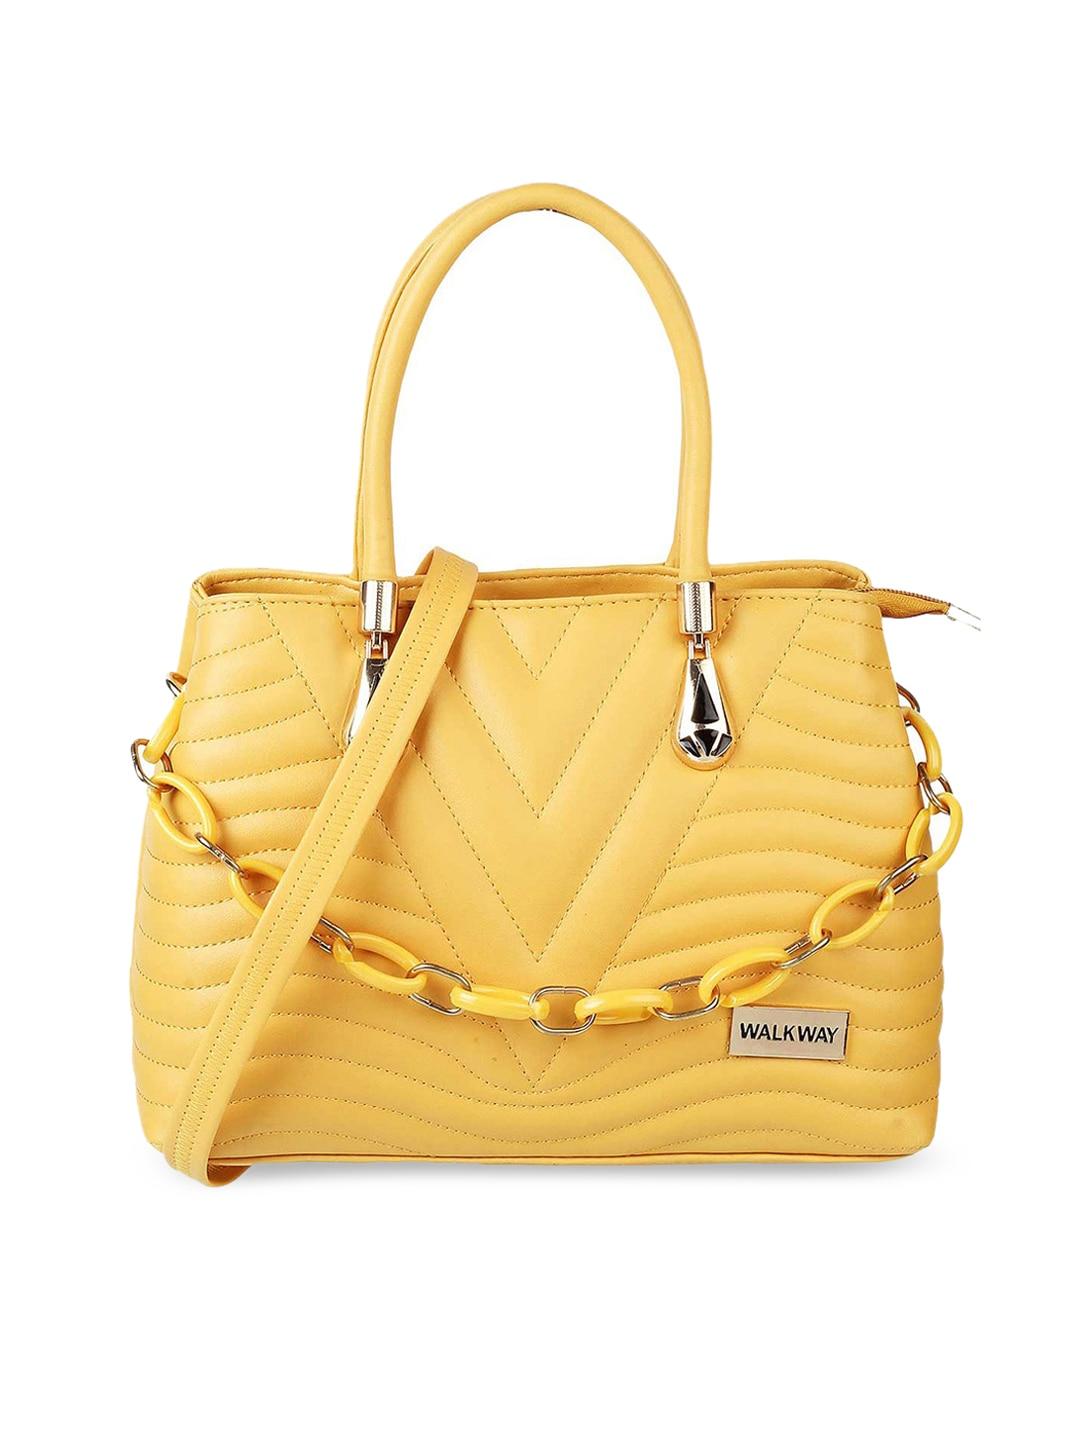 walkway by metro yellow textured structured handheld bag with quilted details